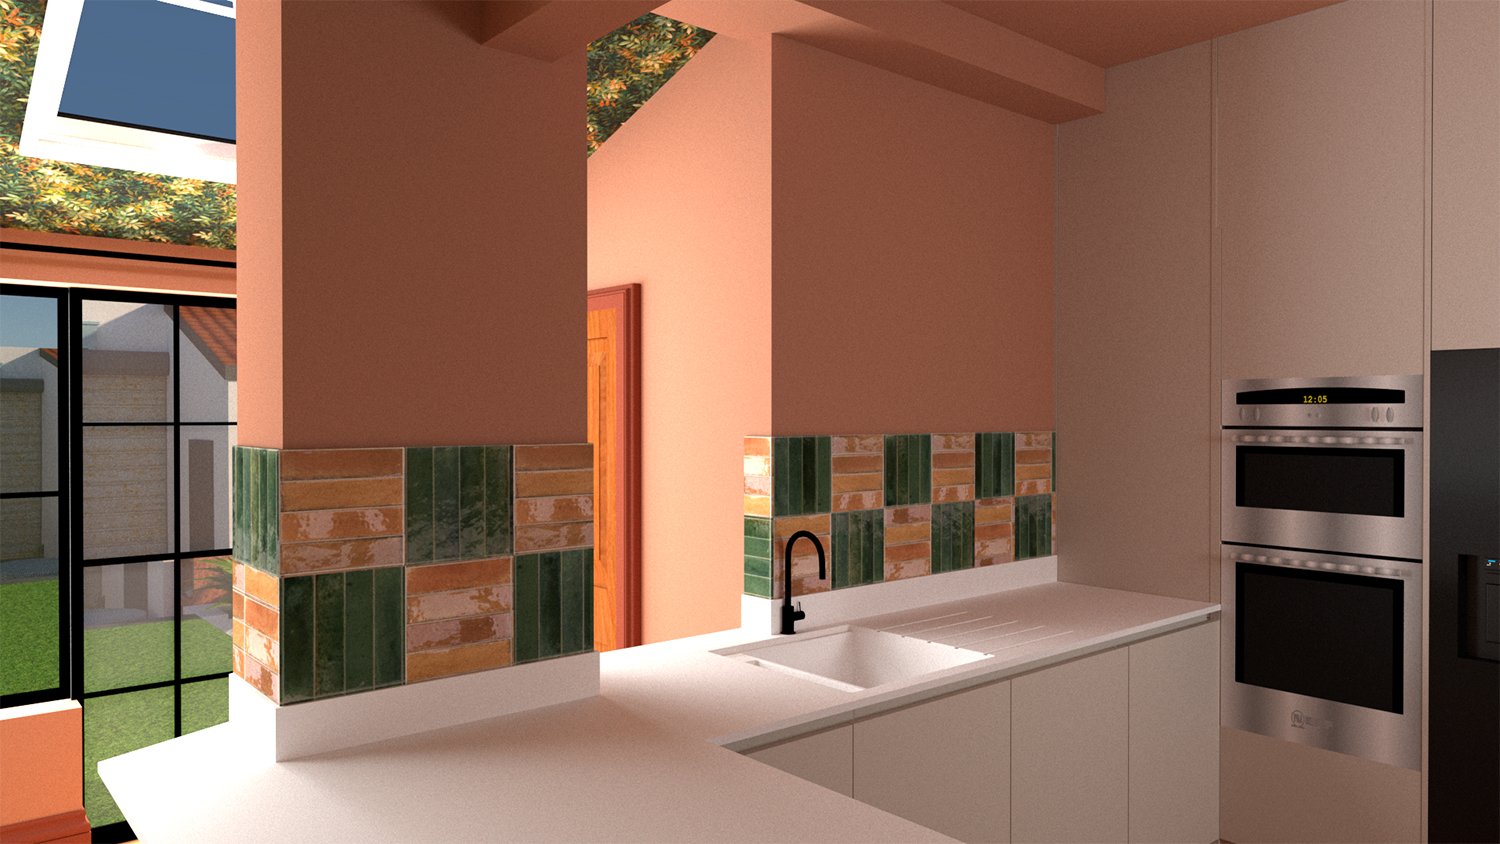 A computer generated render of a kitchen design with the tiles laid out in the pattern I saw at The Red House.